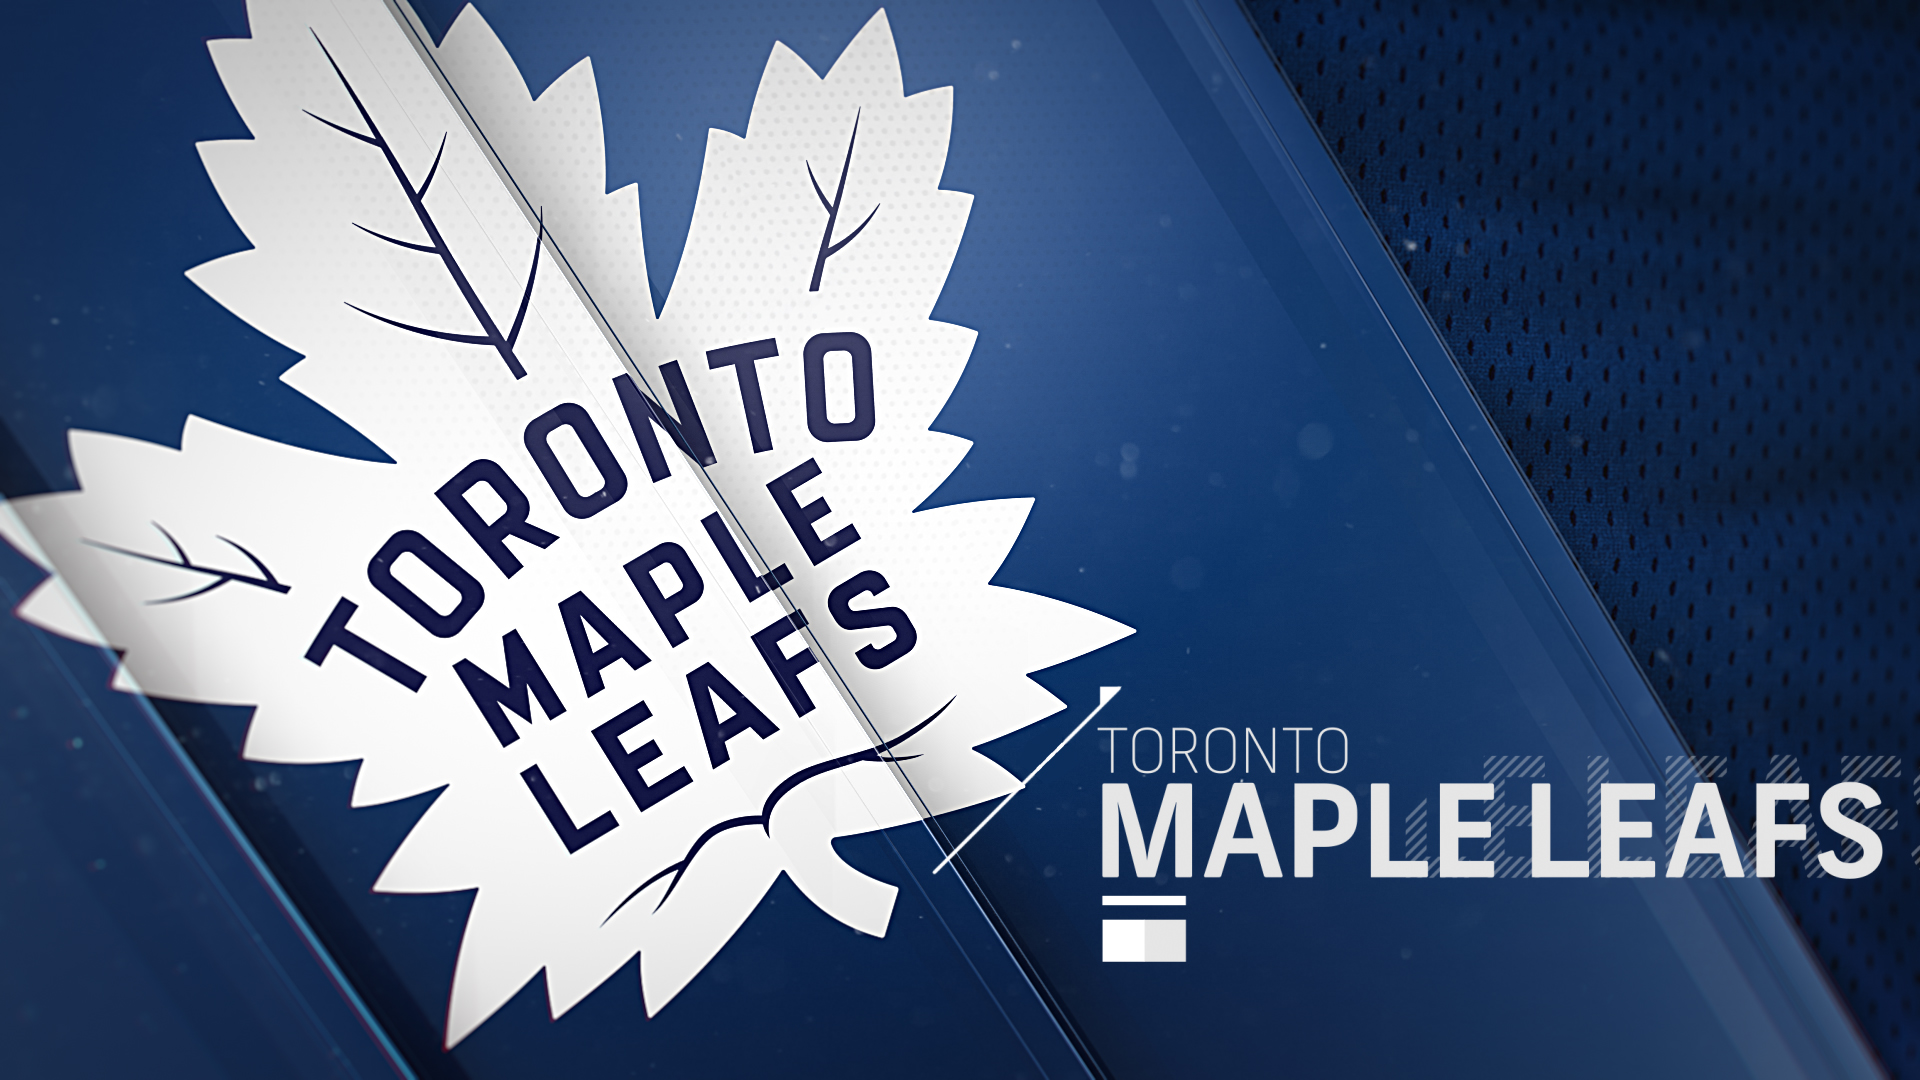 Toronto Maple Leafs Wallpapers - Top 20 Best Toronto Maple Leafs Wallpapers  [ HQ ]